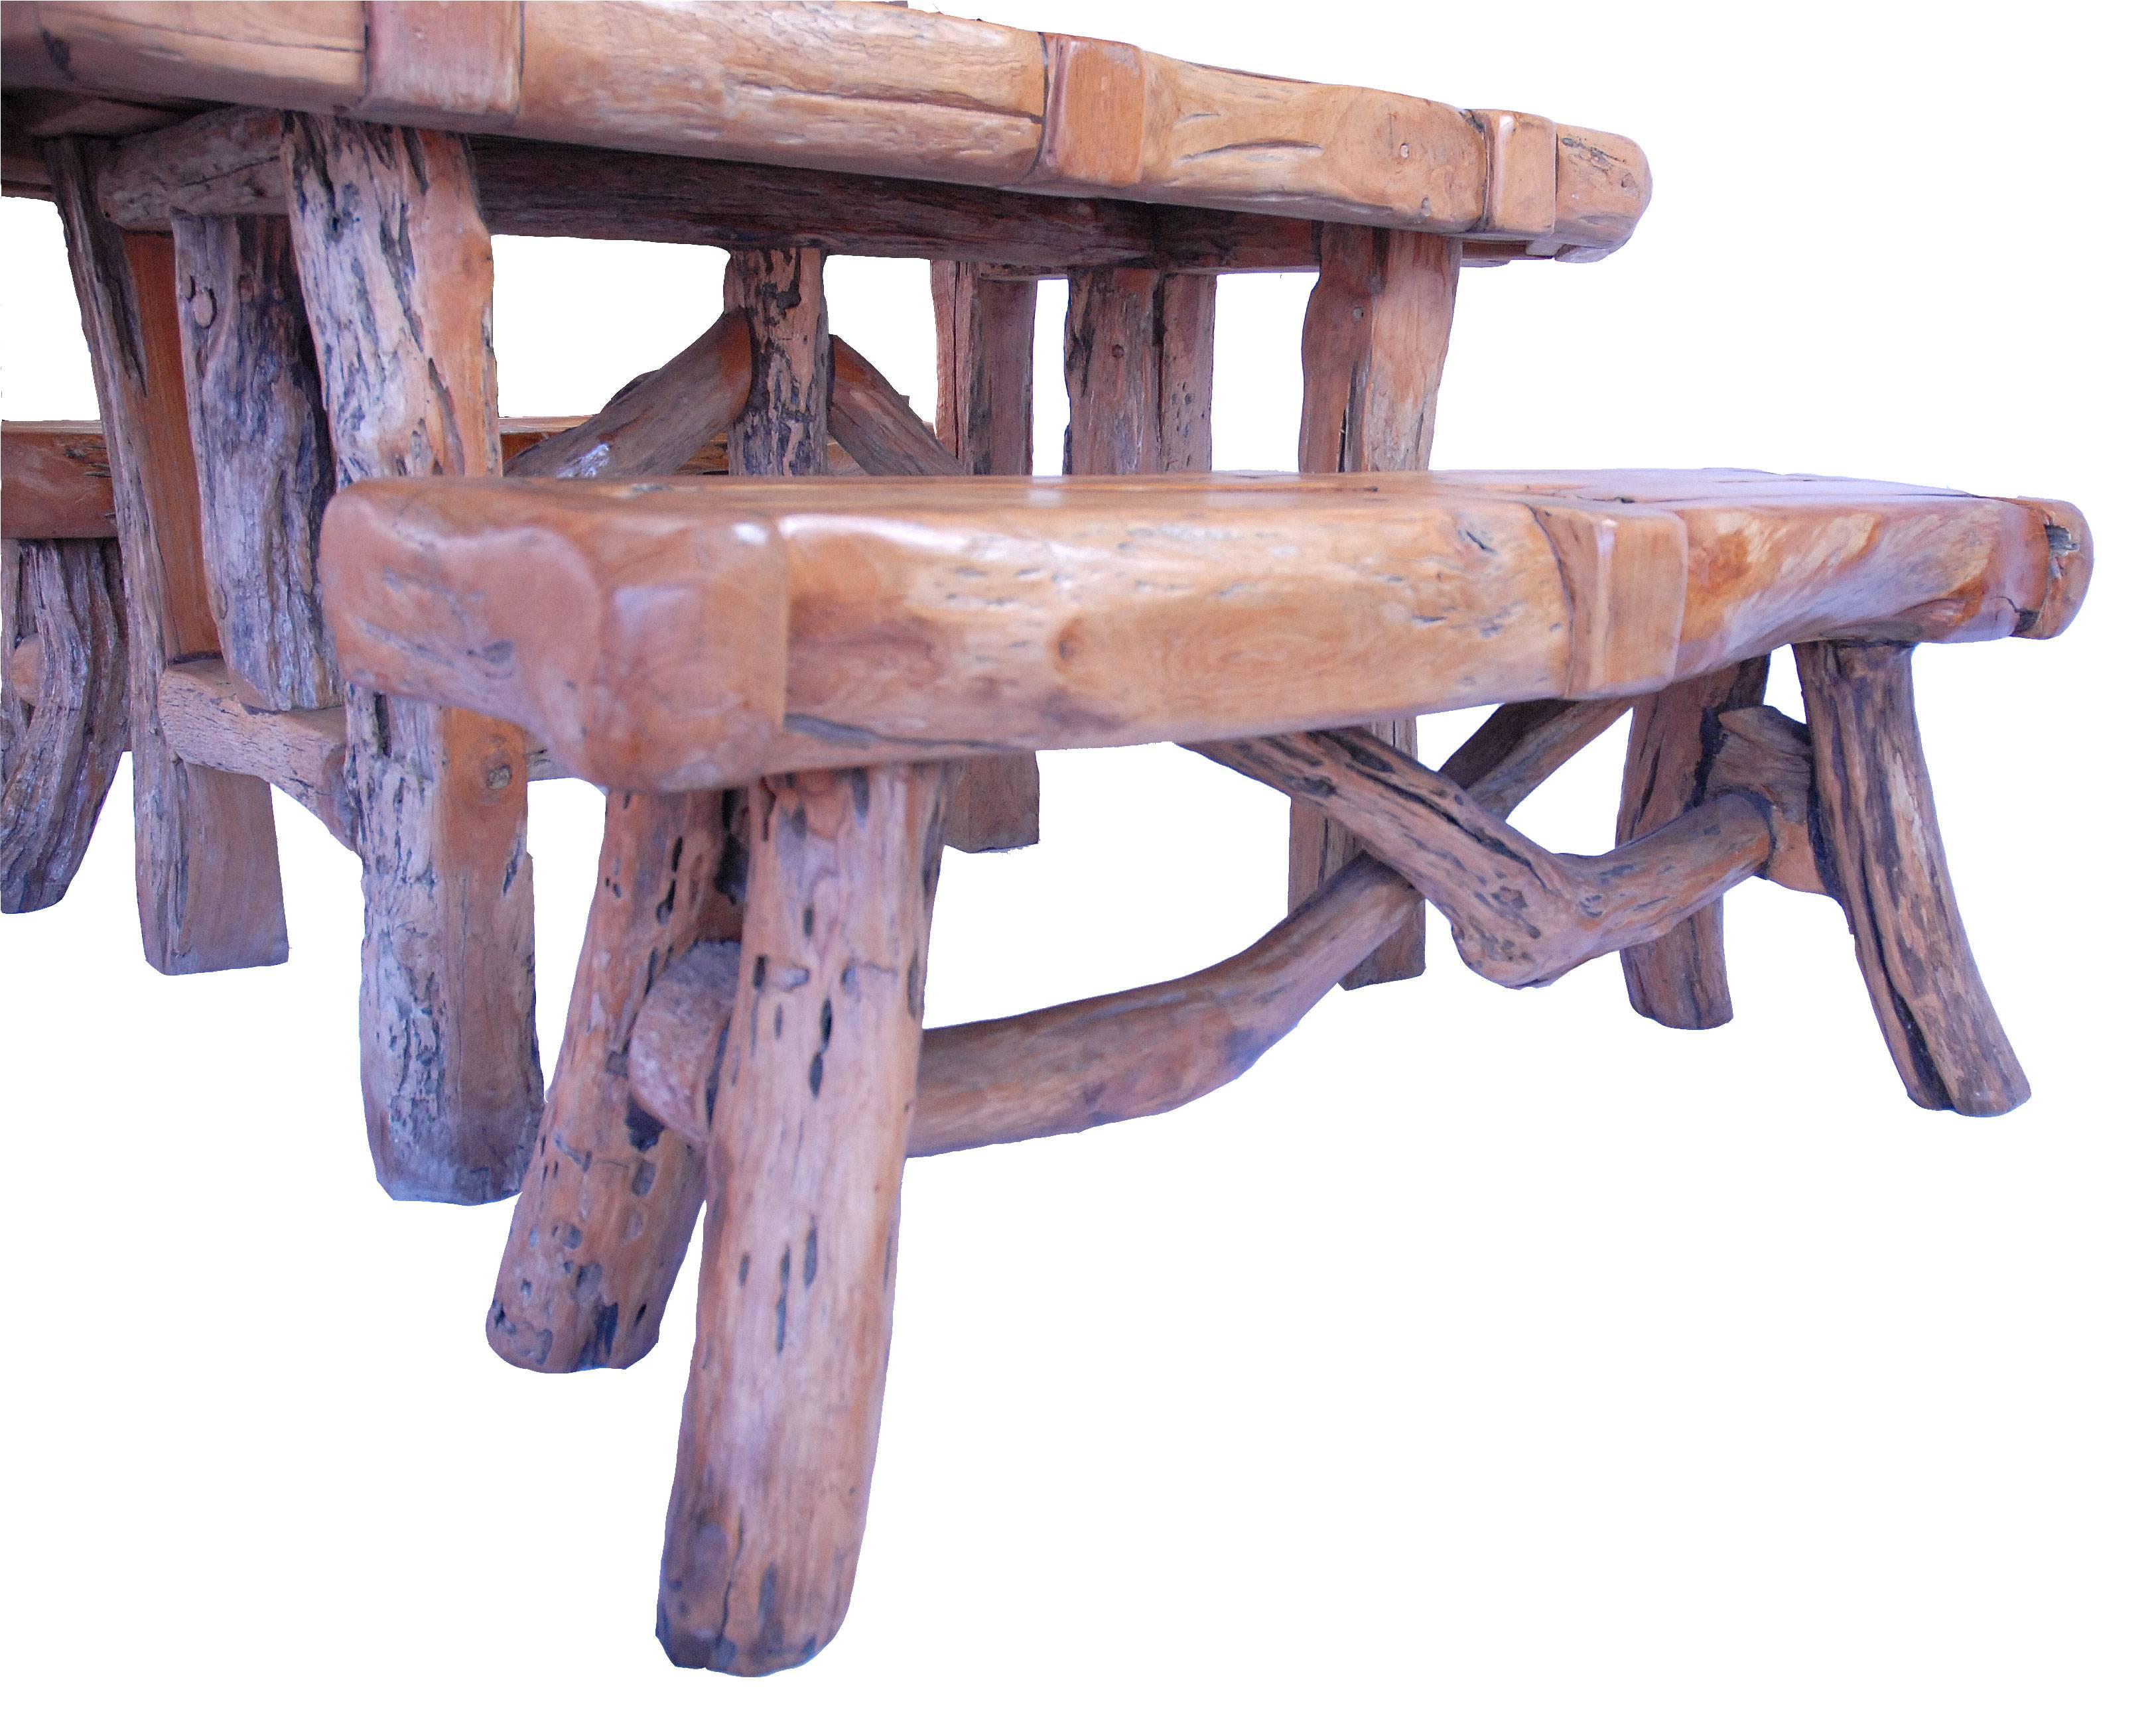 Hand-Carved Teak Dining Table Set with Benches